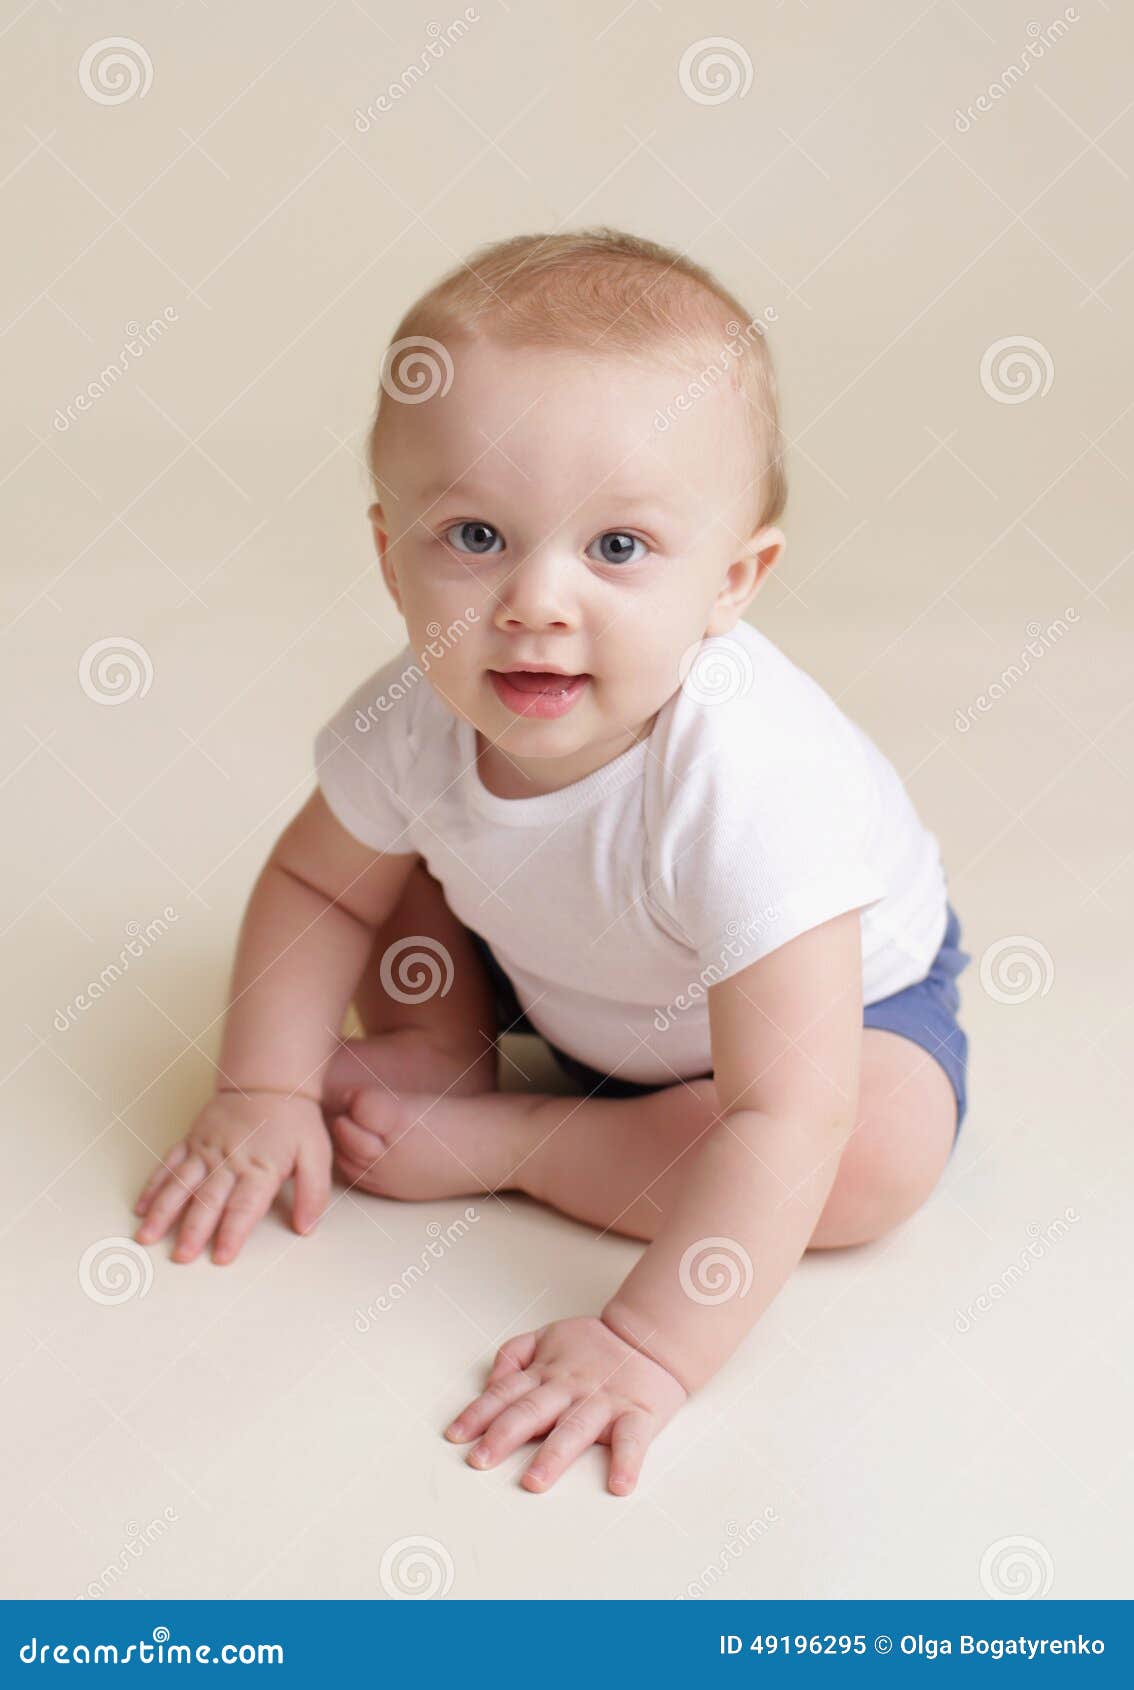 Happy Baby Sitting stock image. Image of strong, smiling - 49196295